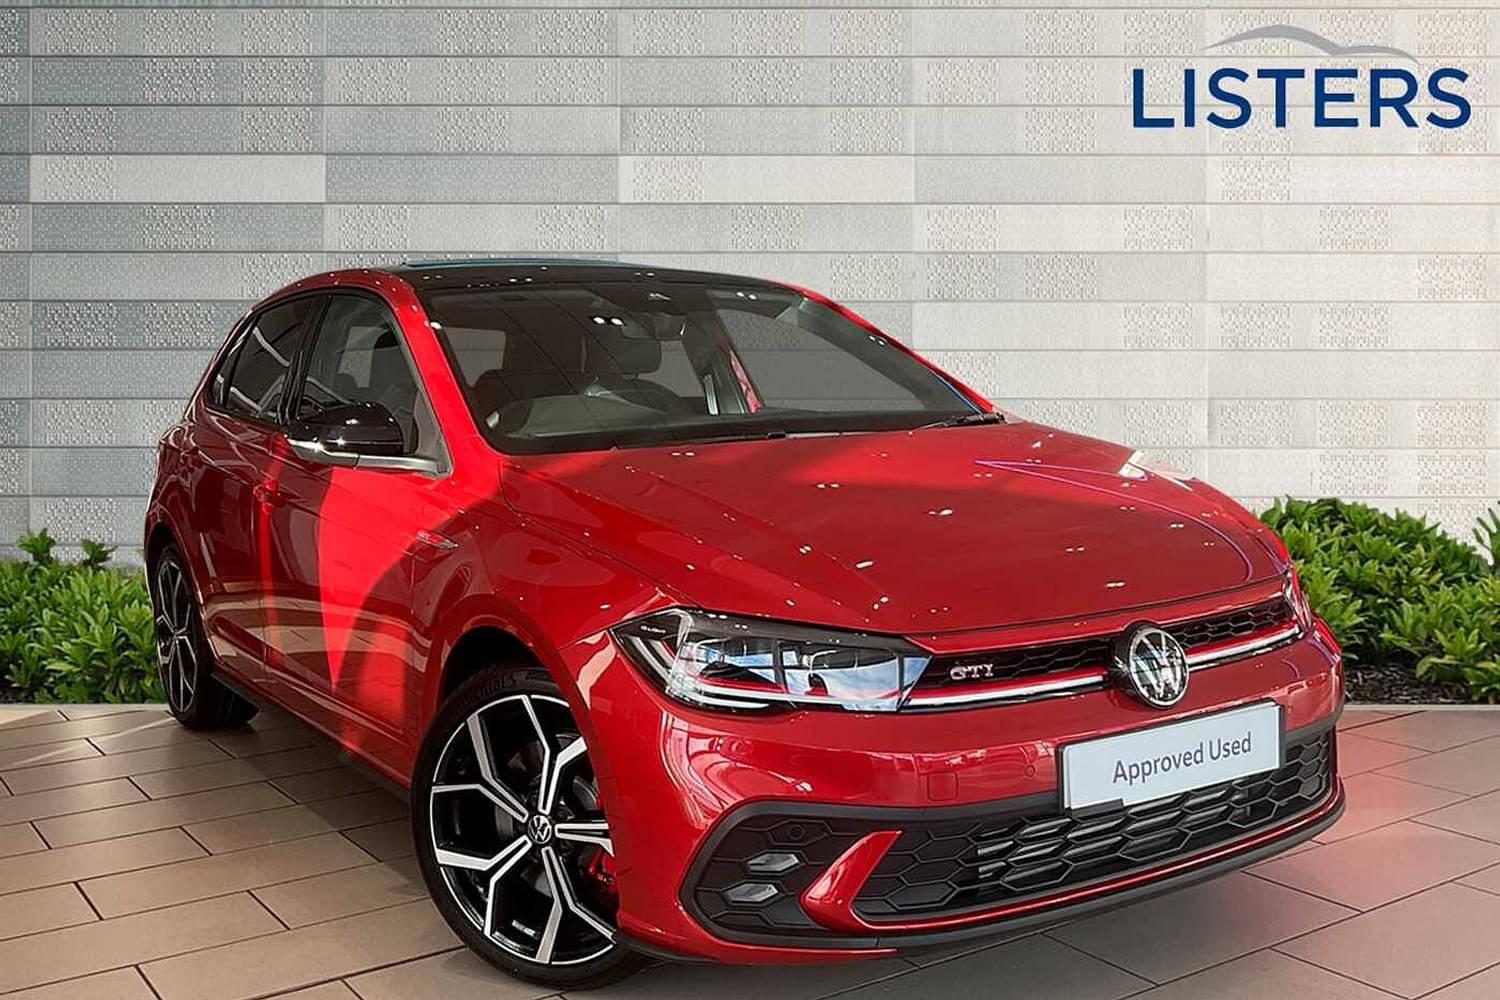 Used Volkswagen Polo 2.0 TSI GTI Cars For Sale - Listers